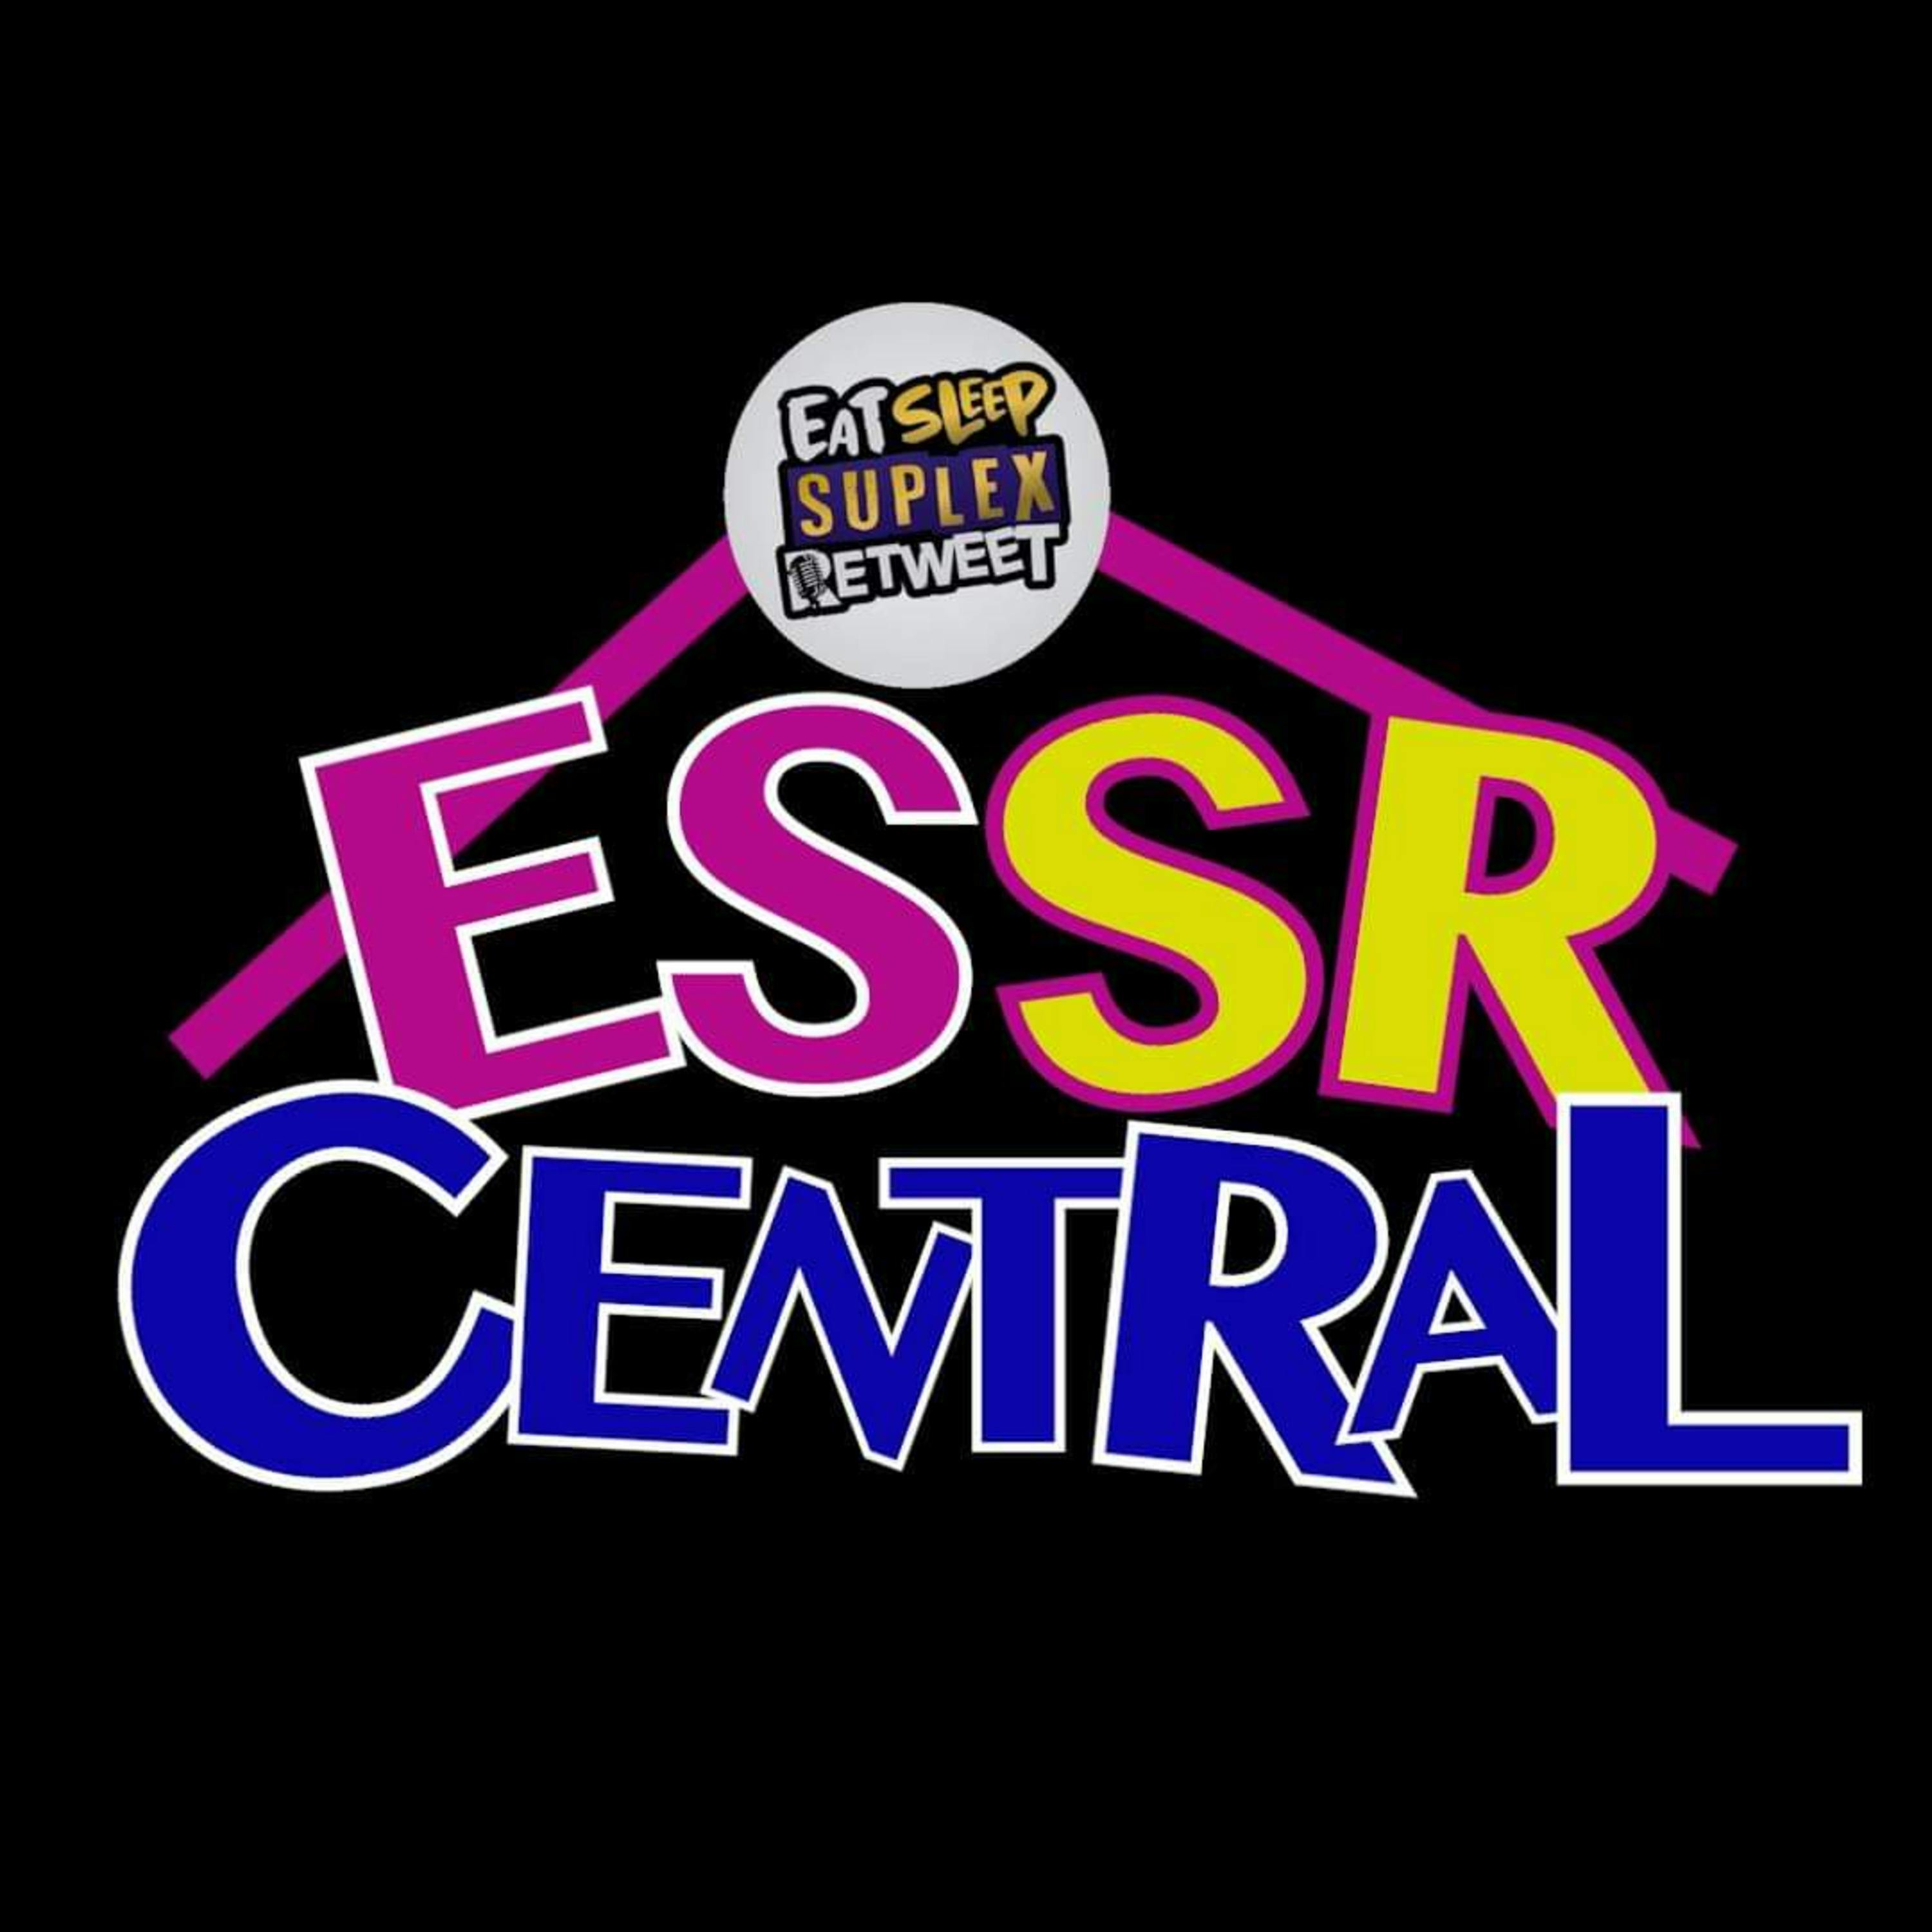 ESSR Central #105 - Mania Main Event Winner in Doubt, Hall of Fame & Impact Sacrifice